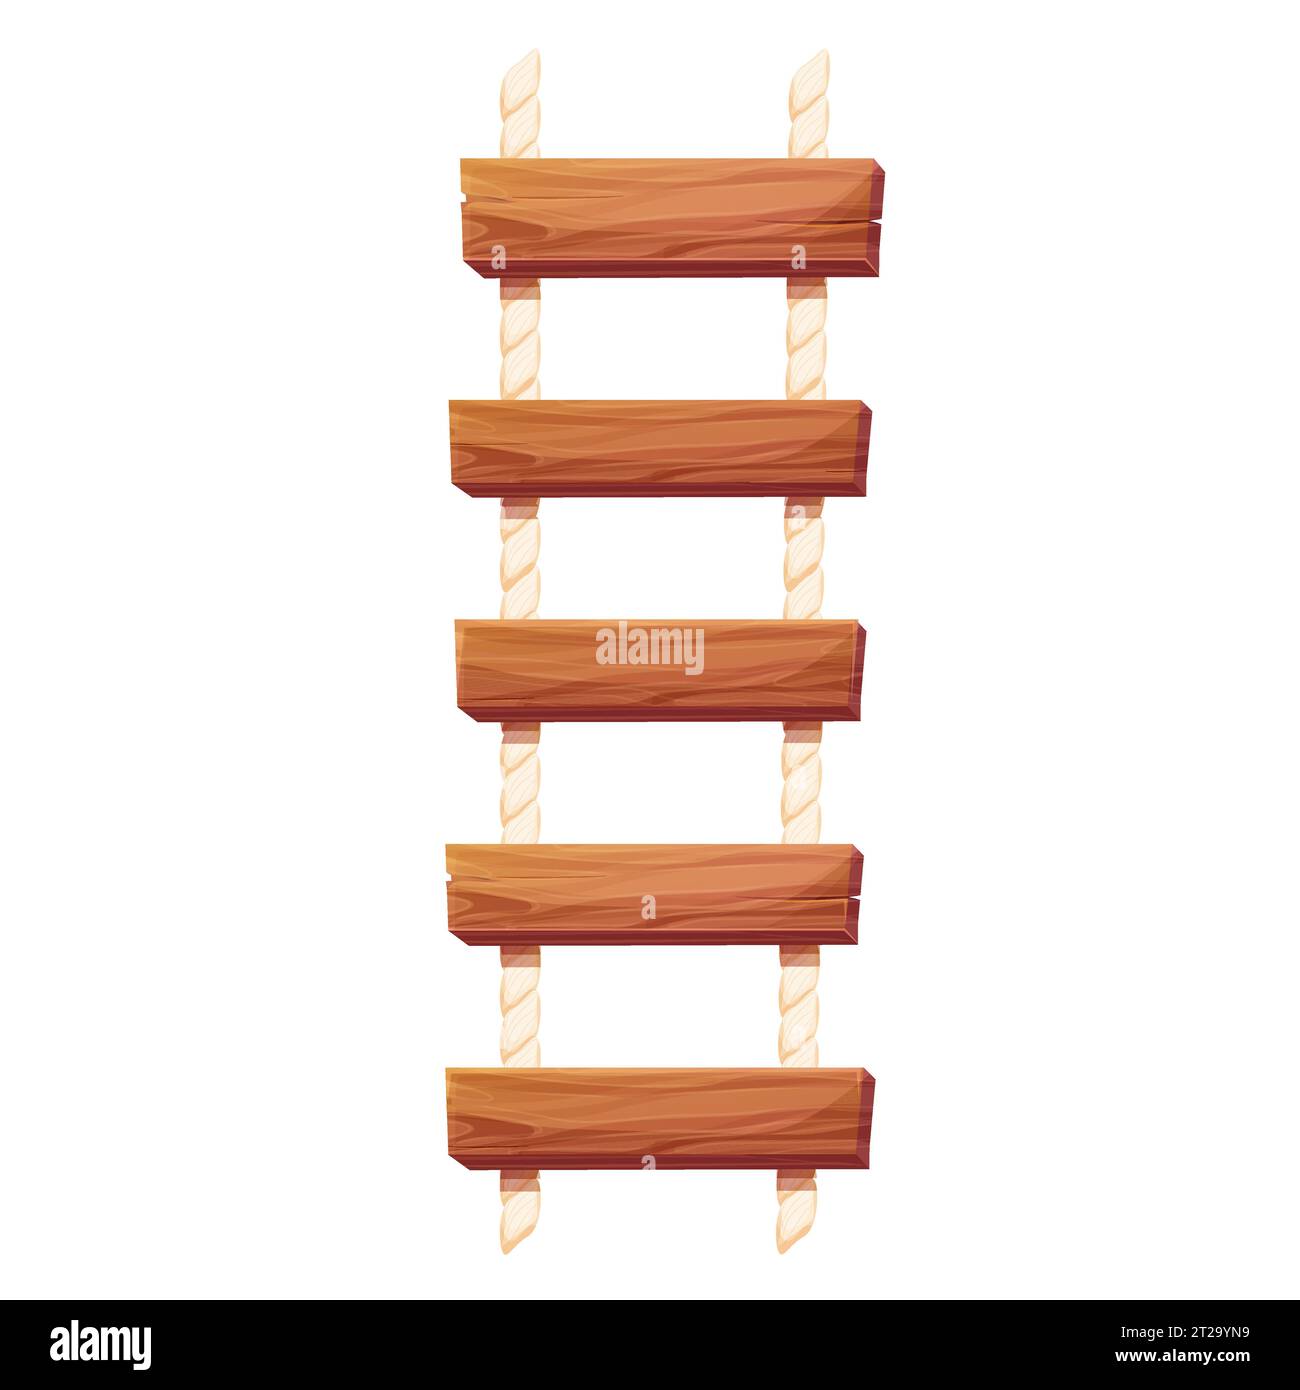 Rope ladder Cut Out Stock Images & Pictures - Alamy